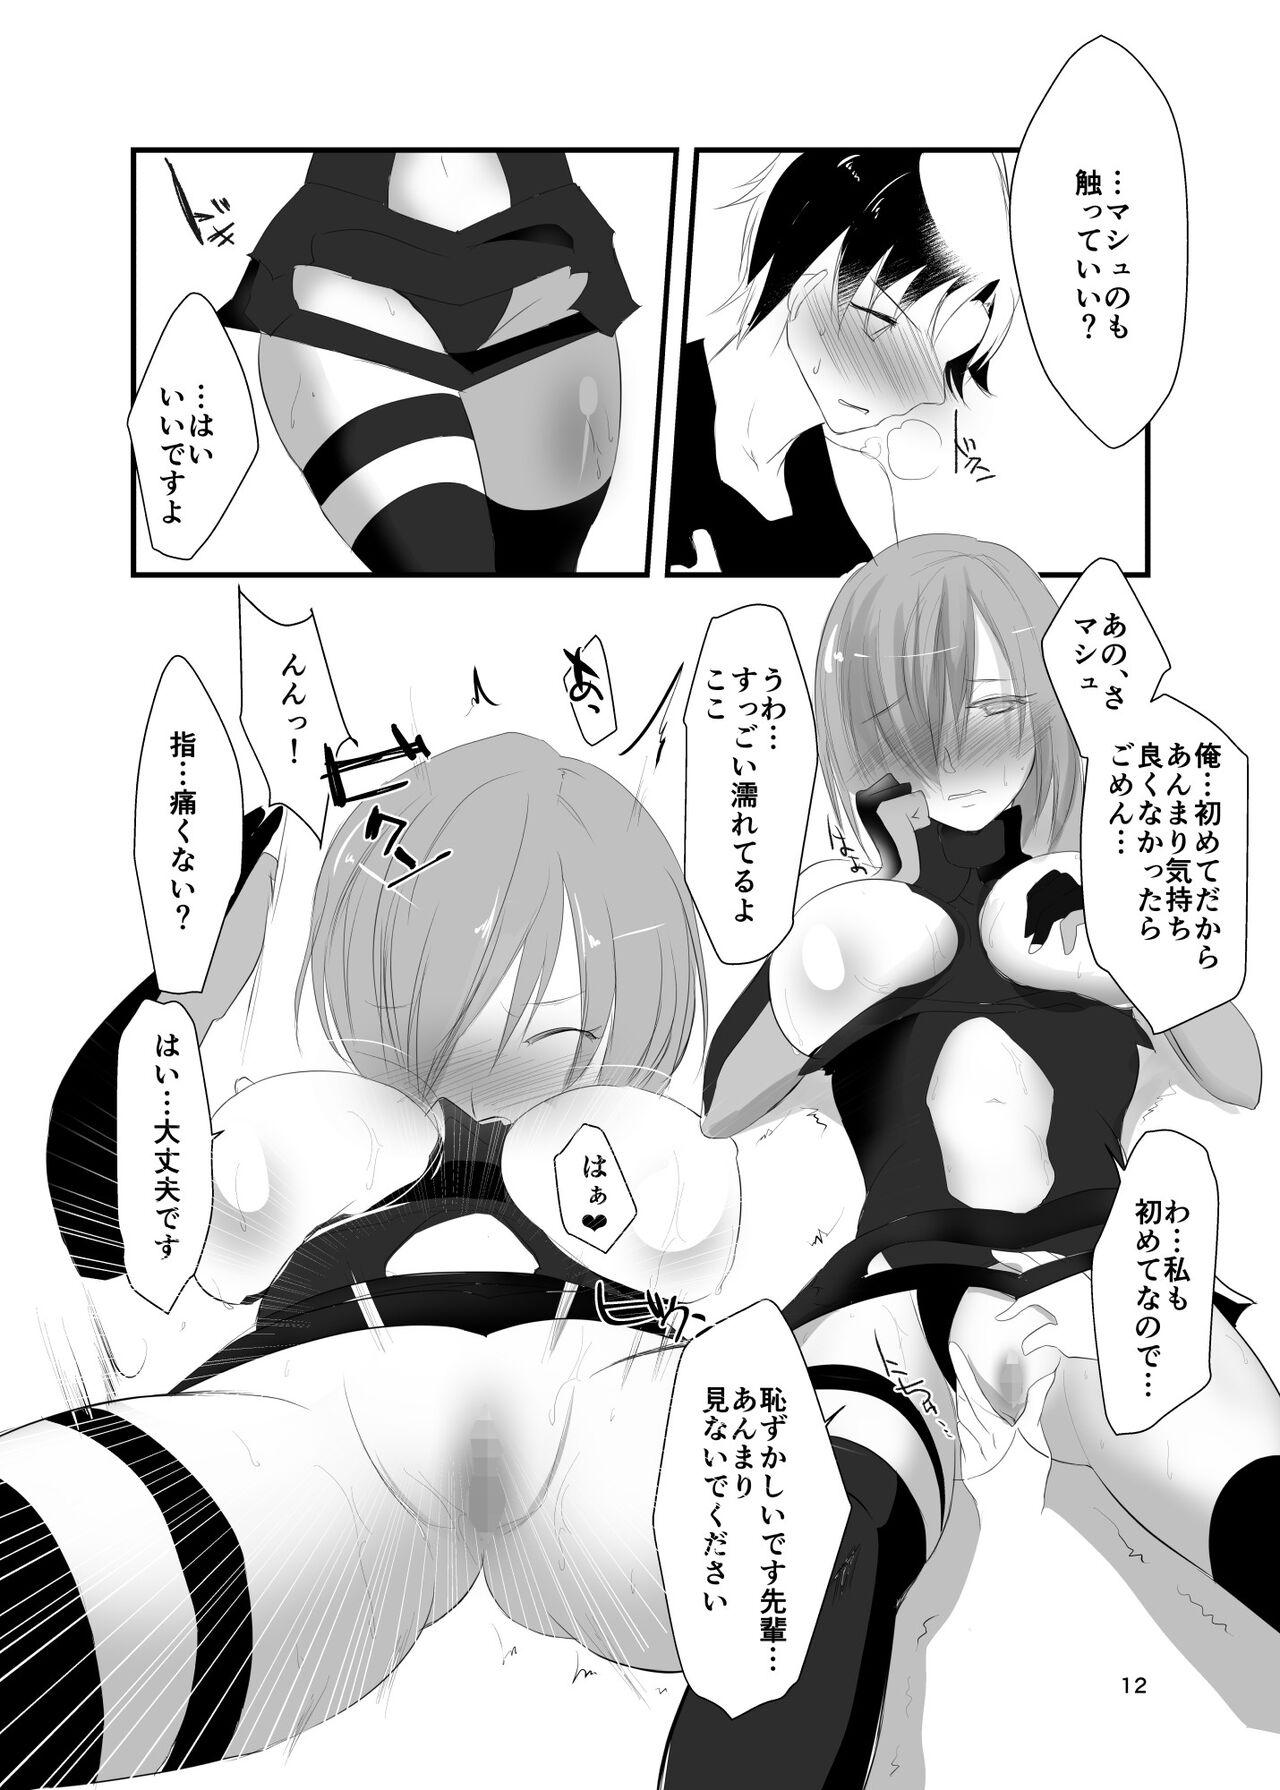 Femboy Koi no Personal Training - Fate grand order Emo Gay - Page 12